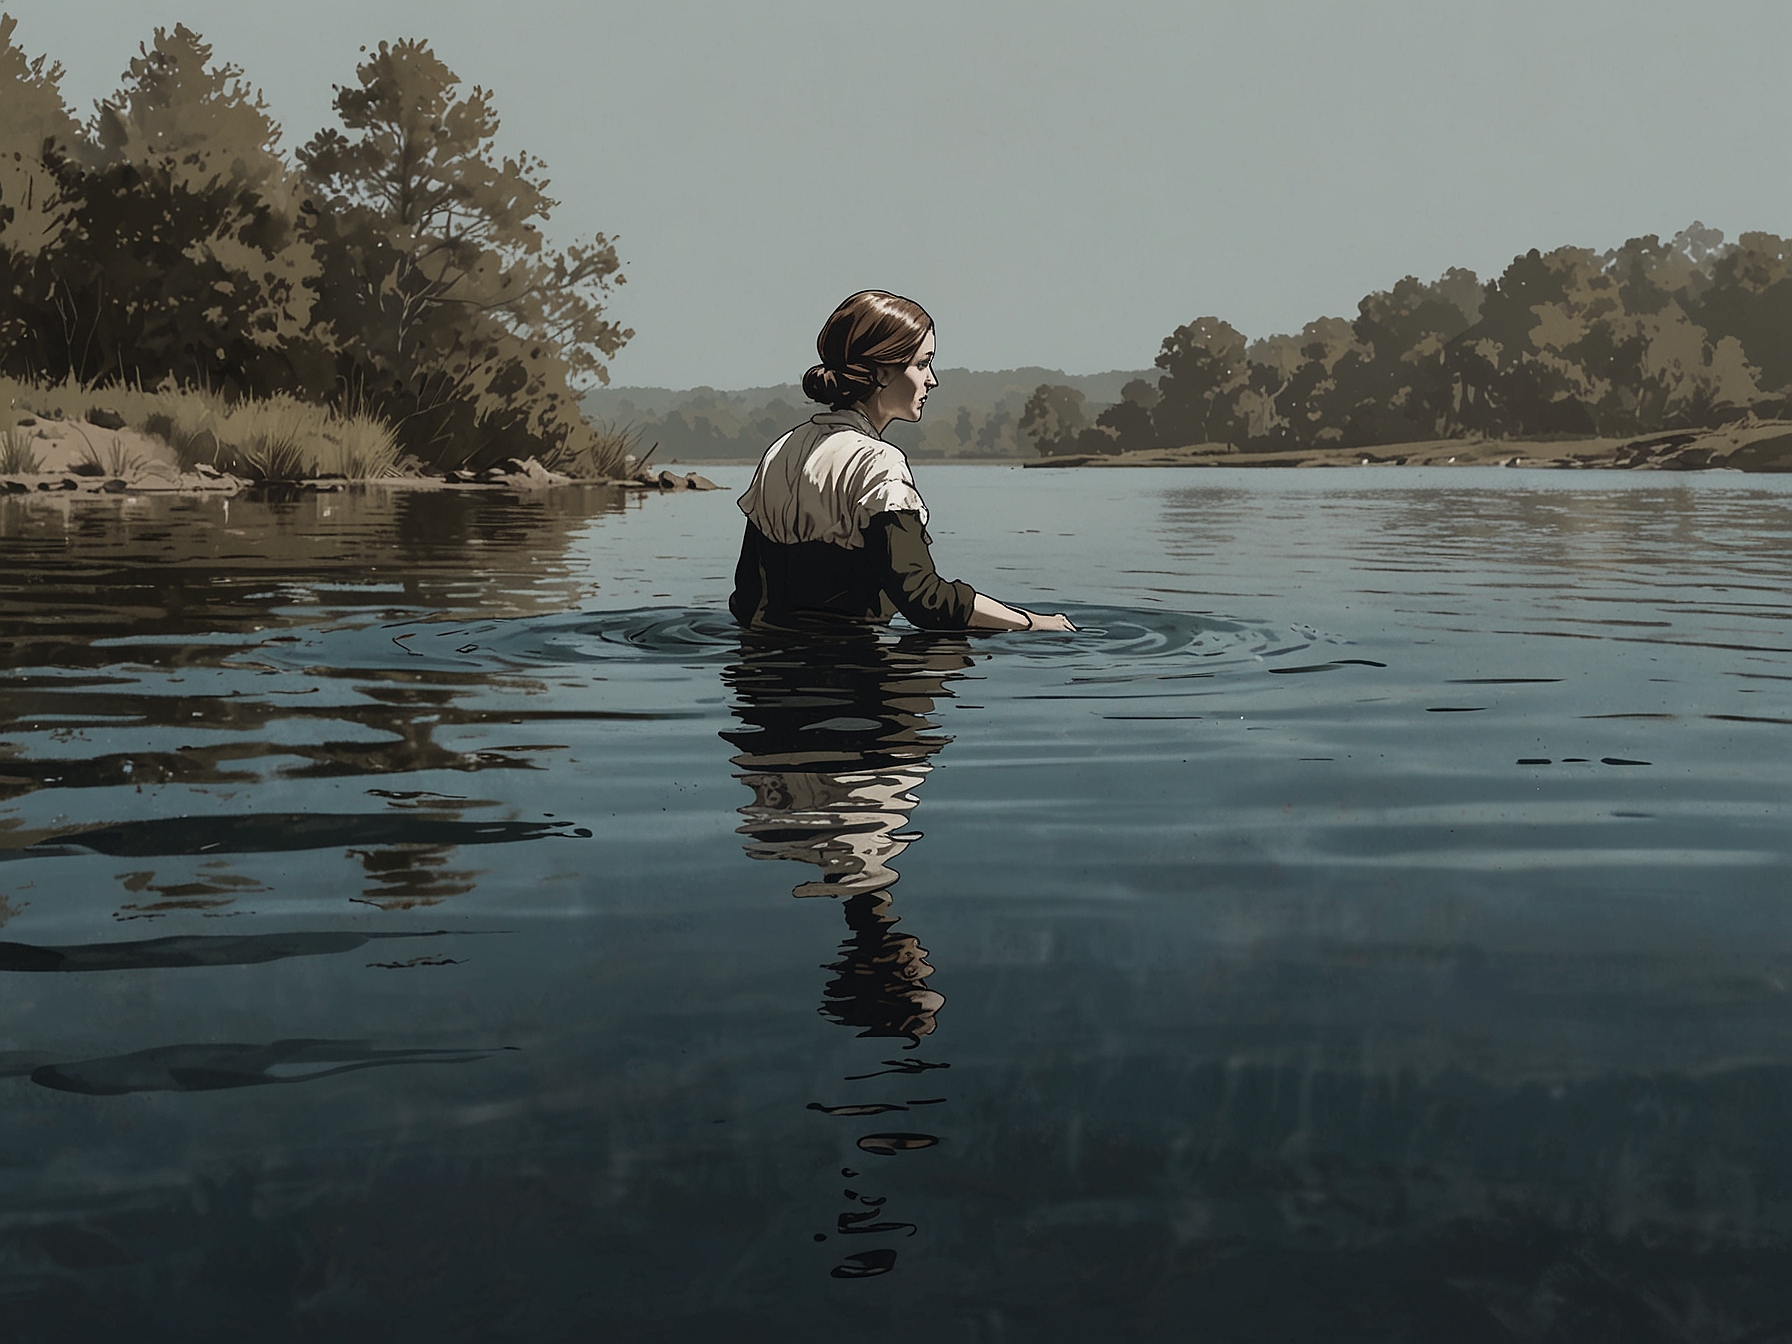 A depiction of Lady Janet Anstruther swimming in a serene lake. Her fearless and unconventional spirit, vividly portrayed in Laurain’s novel, comes to life in this historical illustration.